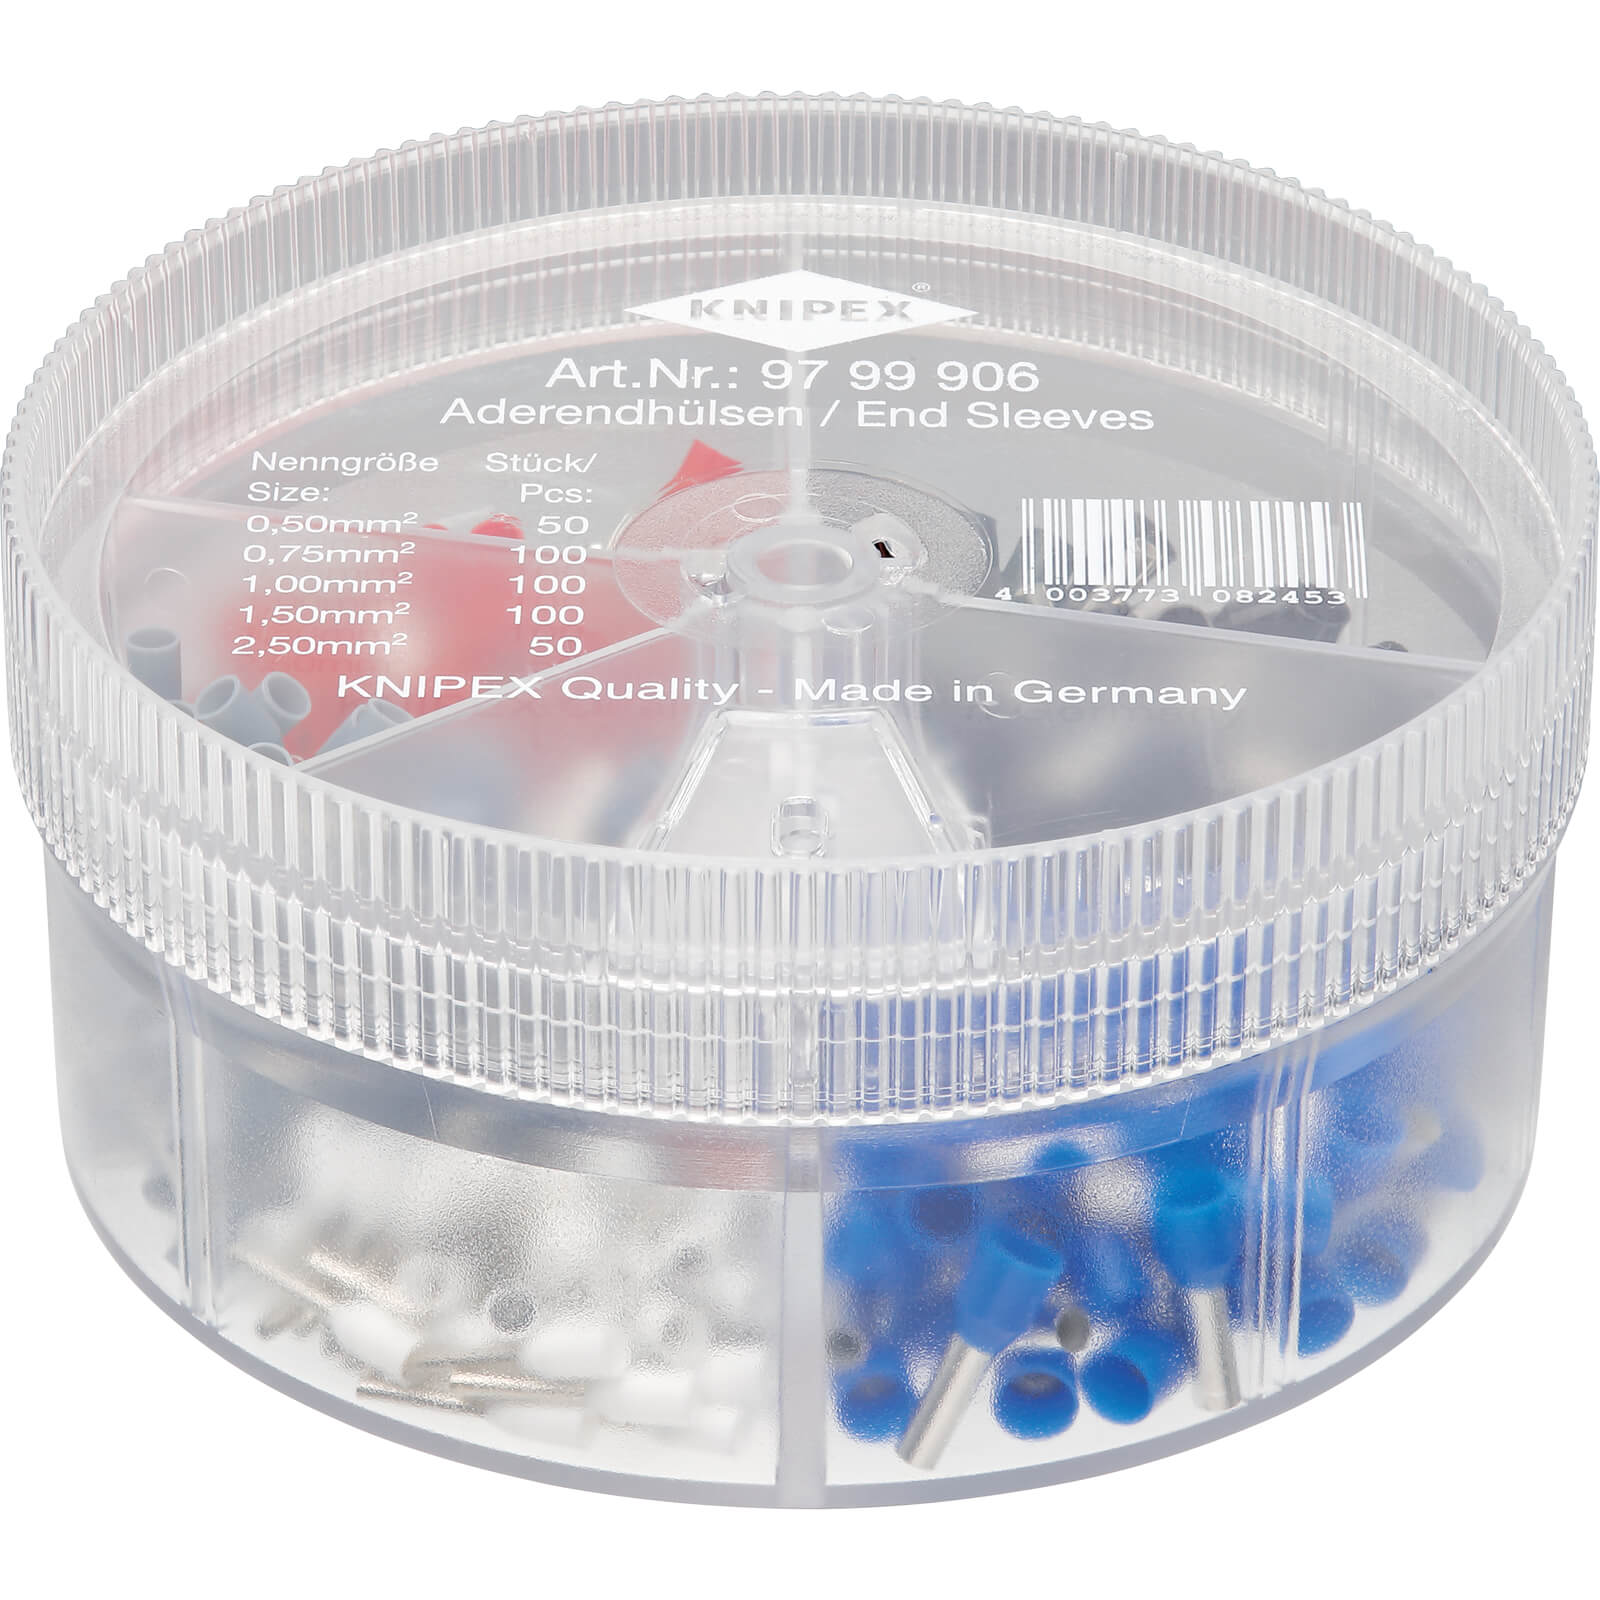 Image of Knipex 97 99 06 Insulated Wire Ferrule Assortment in Dispenser Case